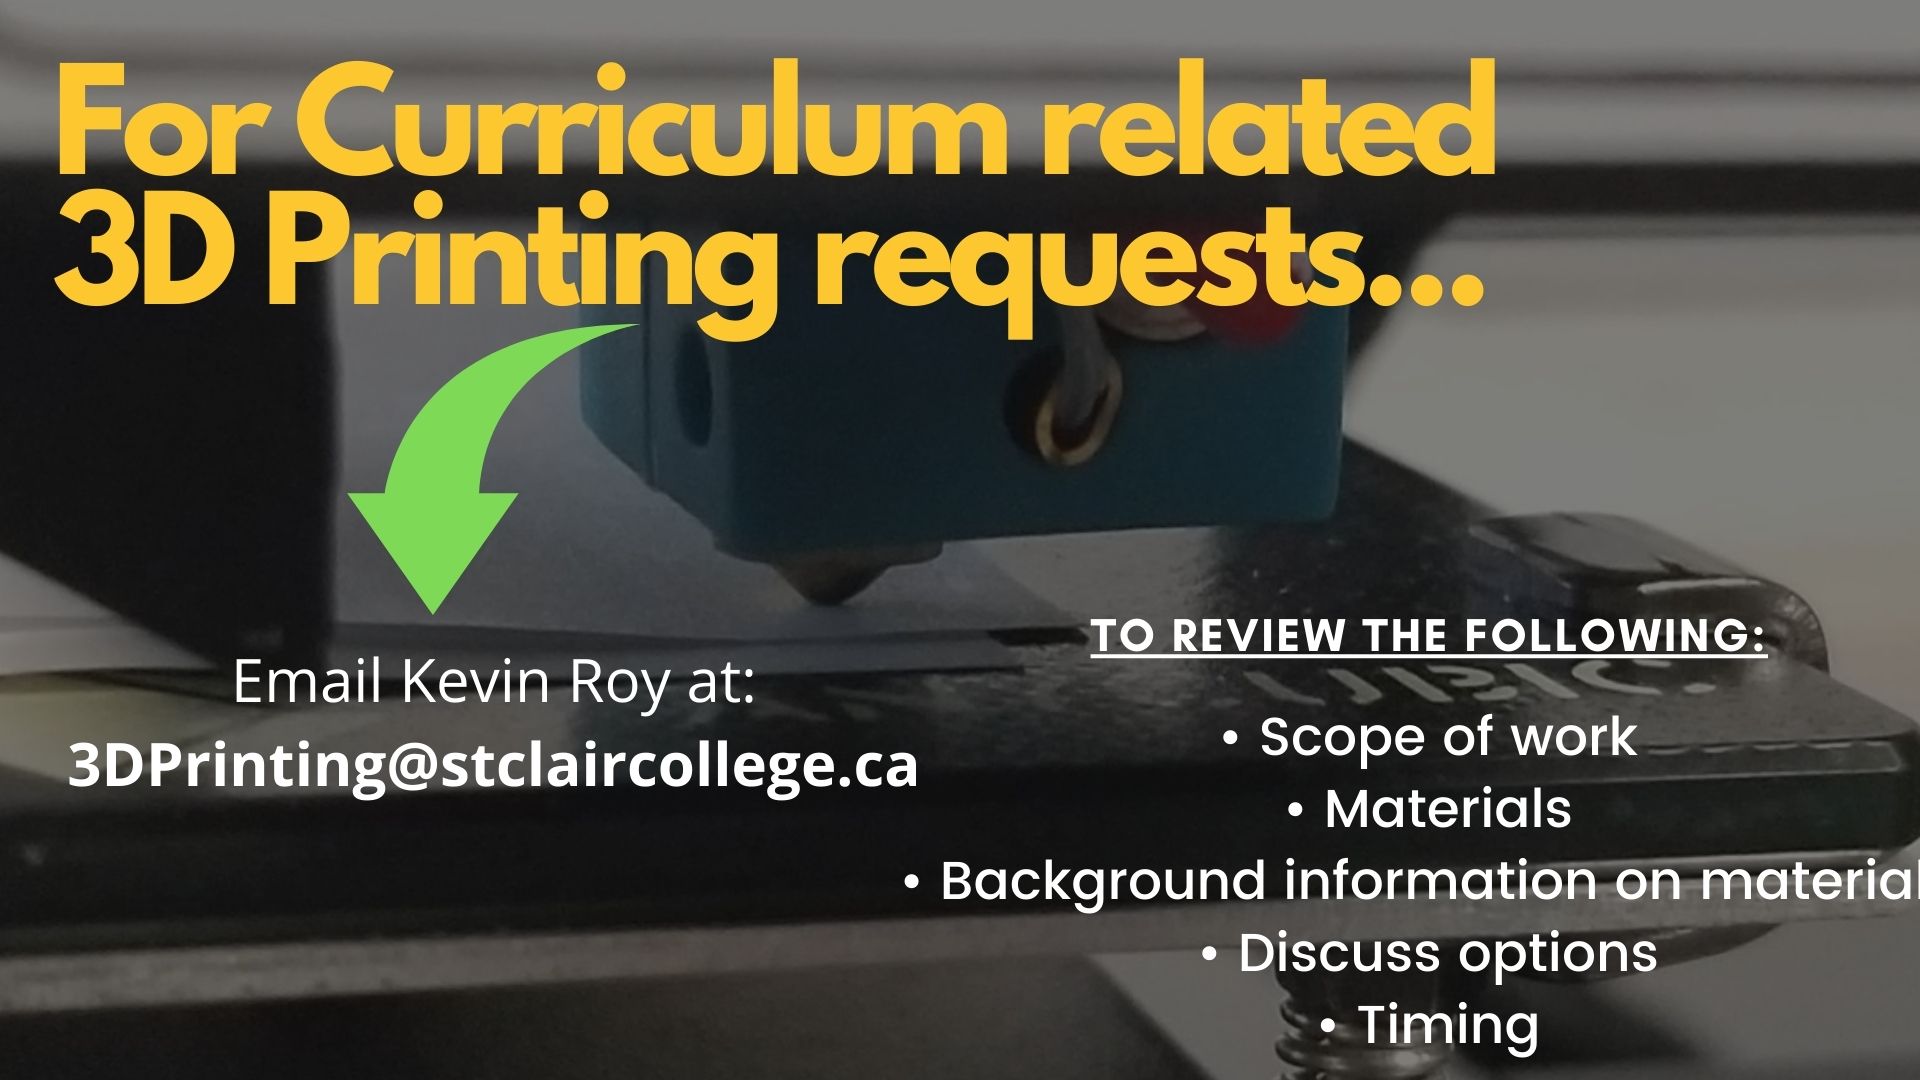 For Curriculum related 3D Printing requests, email Kevin Roy at 3DPrinting@stclaircollege.ca